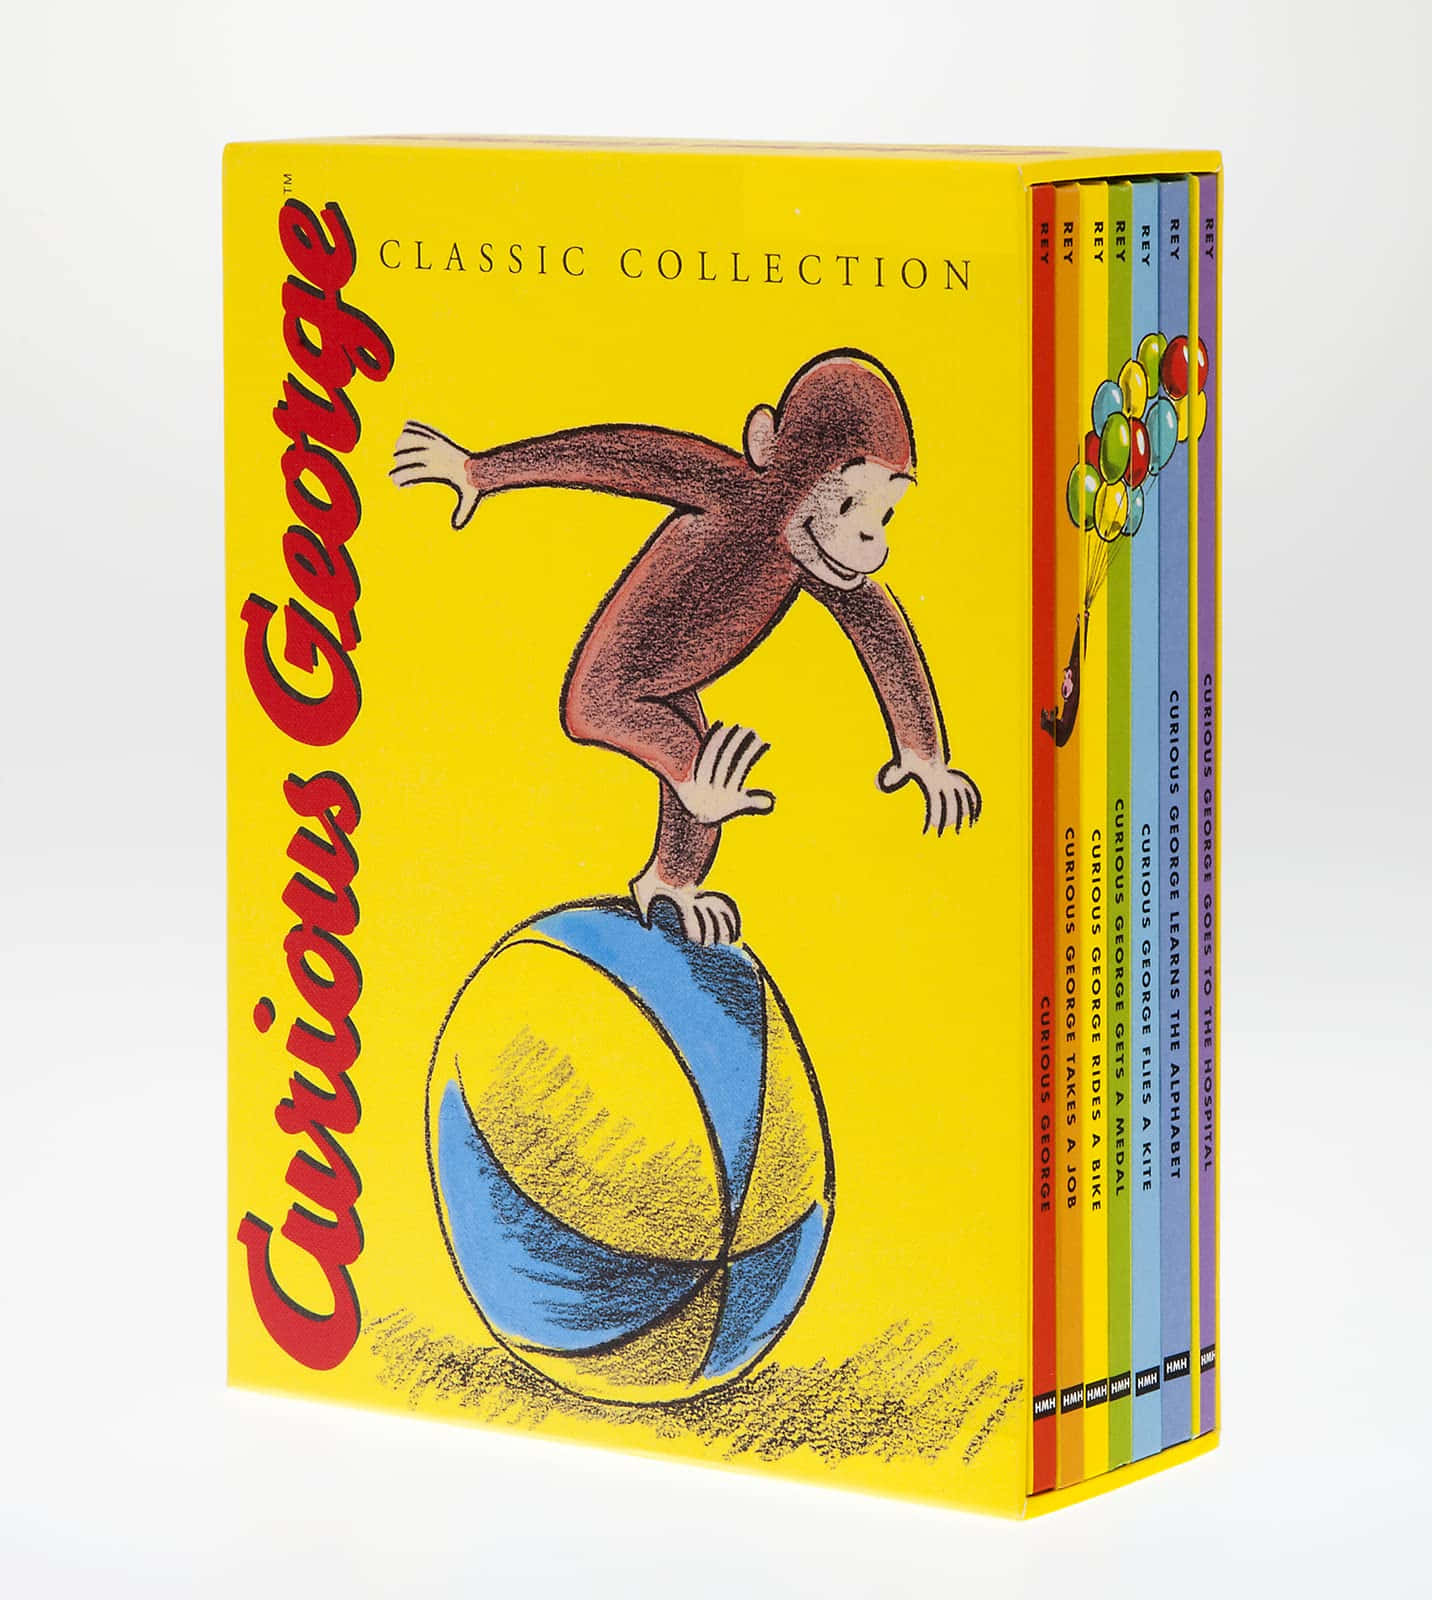 Curious George Captures the Imagination of Children Everywhere